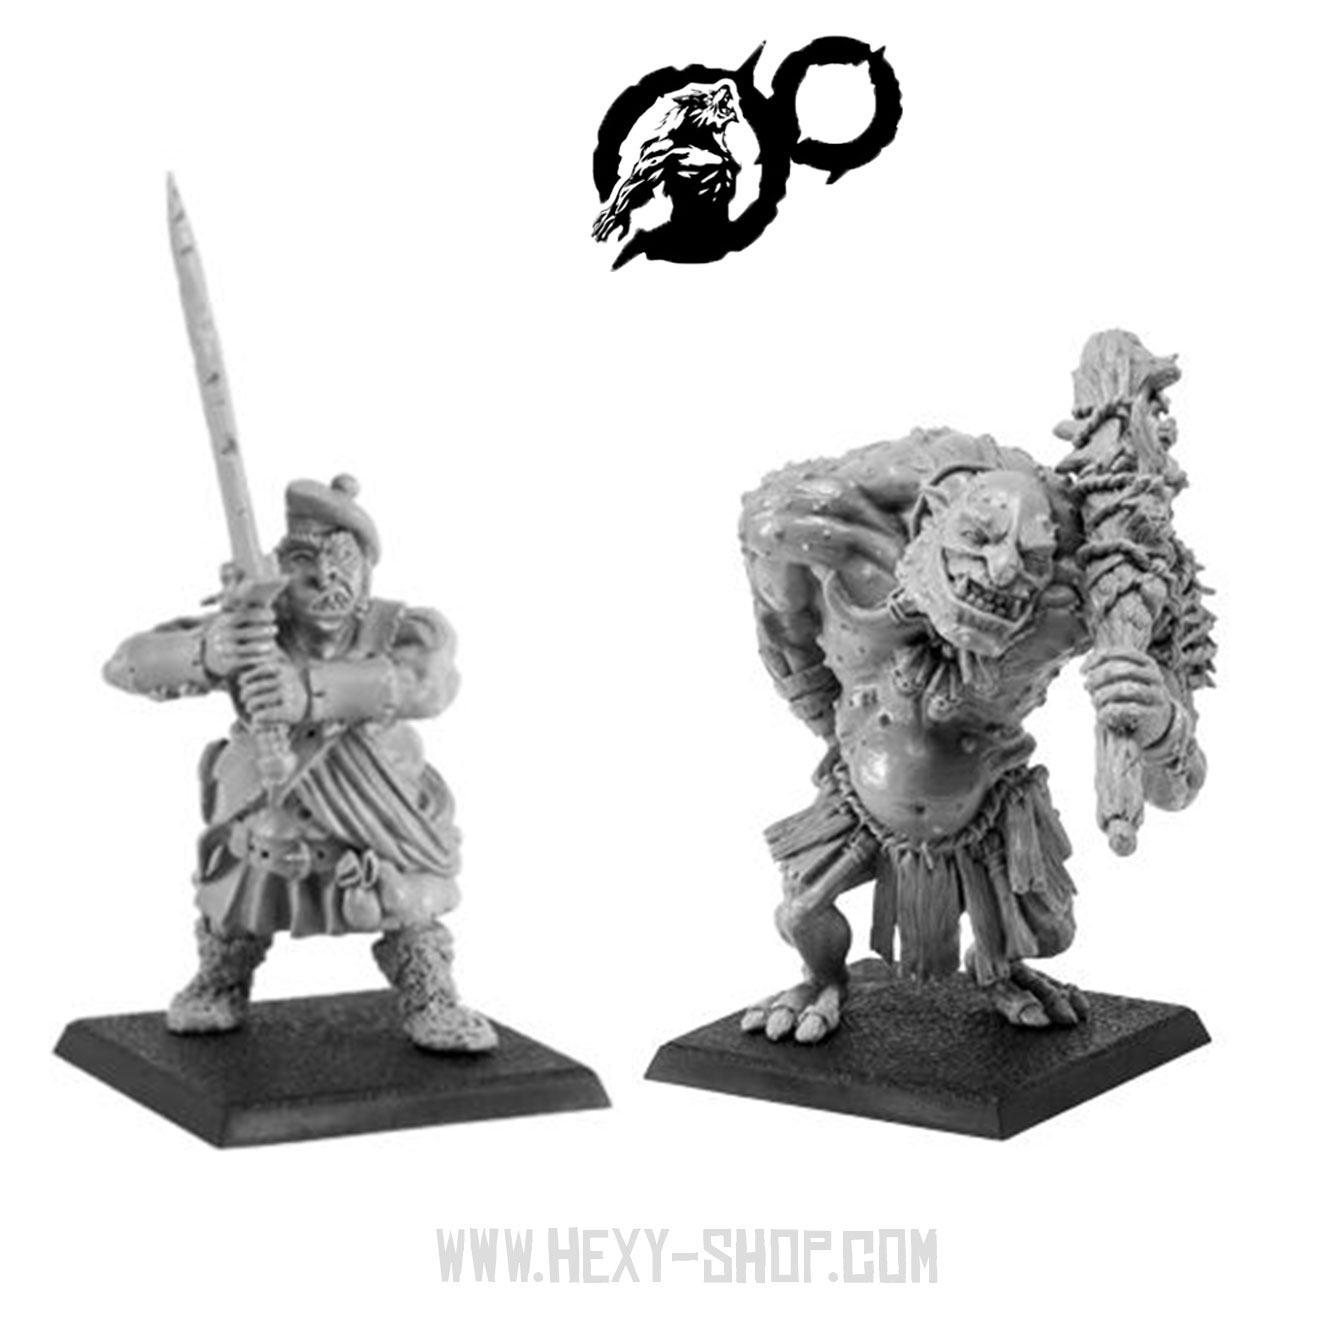 If your army needs ‘muscle’ – Werewoolf Miniatures has something for you. Two new minis: Ogre and Troll…